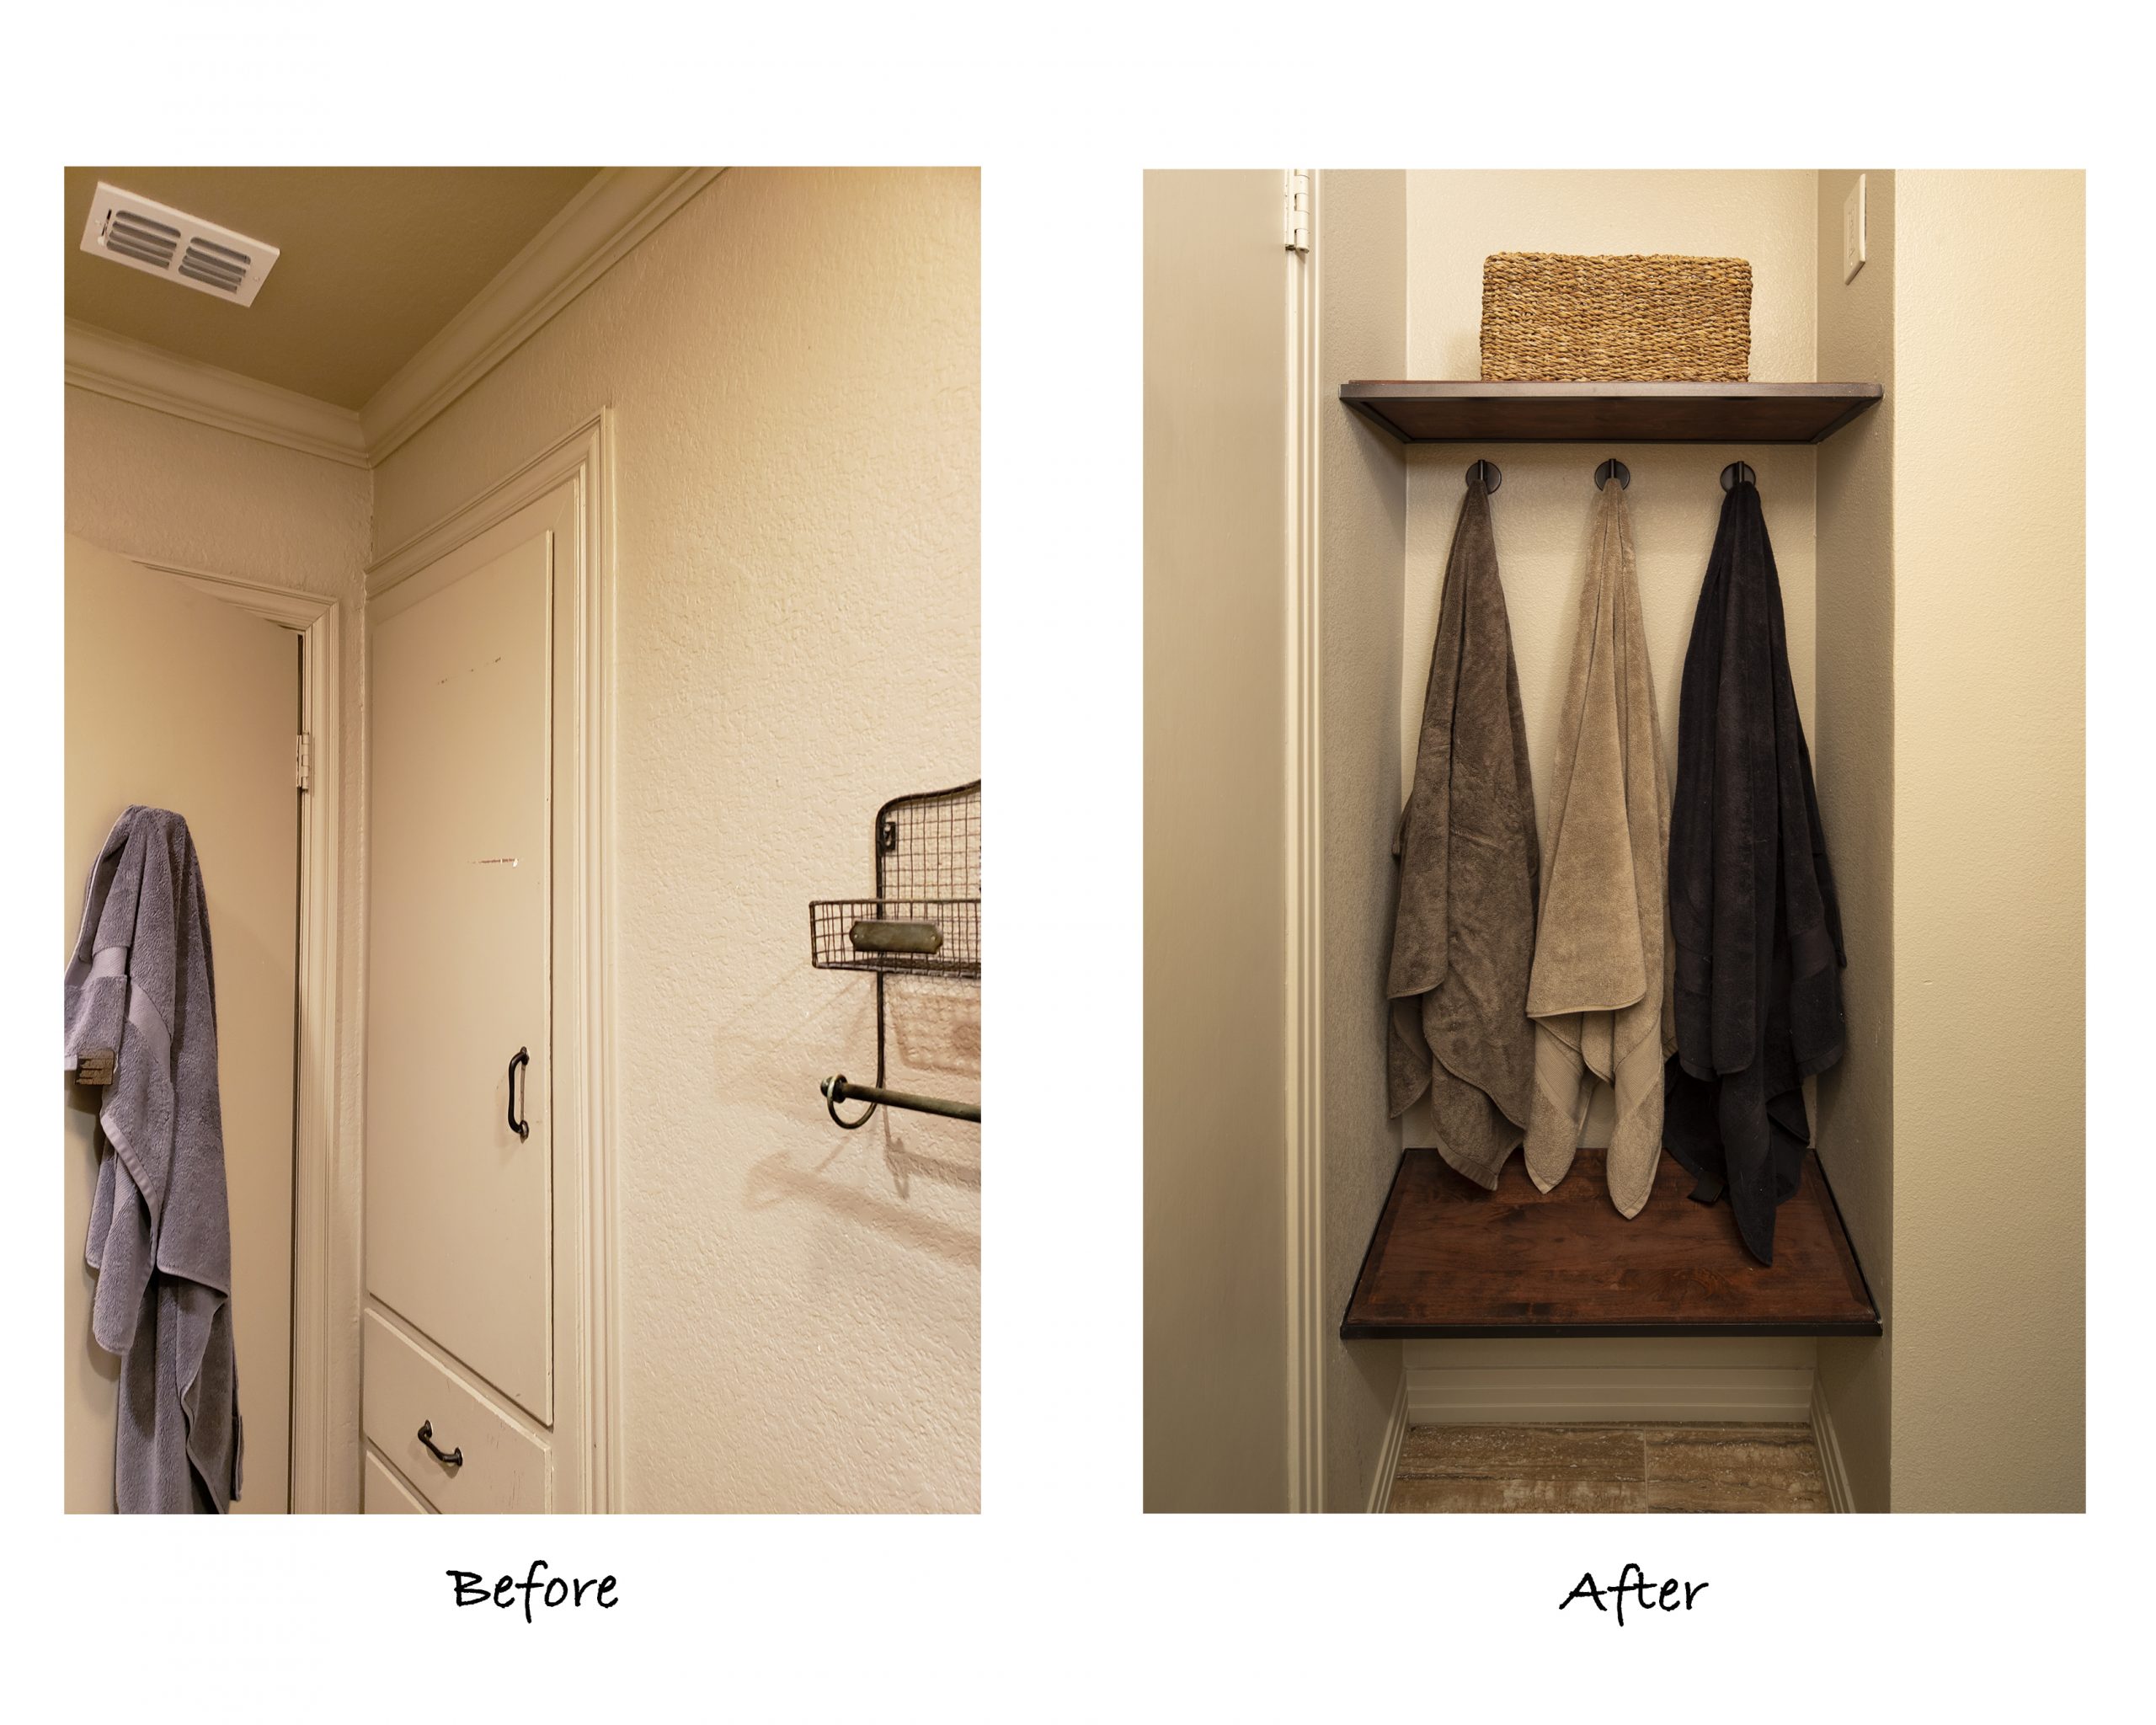 A Nature-Inspired Guest Bathroom Renovation - BEFORE AND AFTER